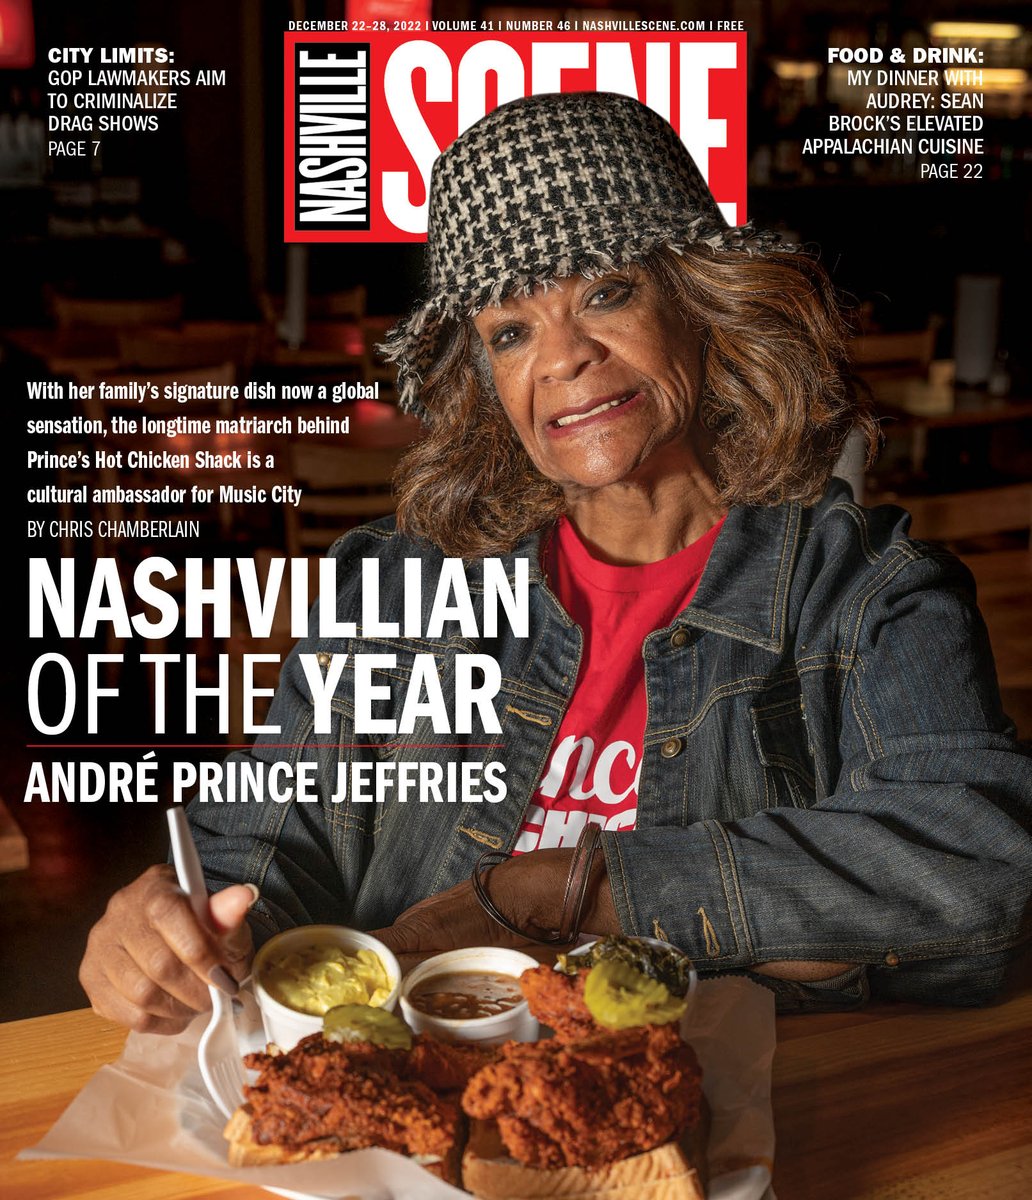 In our annual Nashvillian of the Year issue, we talk with André Prince Jeffries. With her family’s signature dish now a global sensation, the longtime matriarch behind Prince's Hot Chicken is a cultural ambassador for Music City. nashvillescene.com/food_drink/cov…